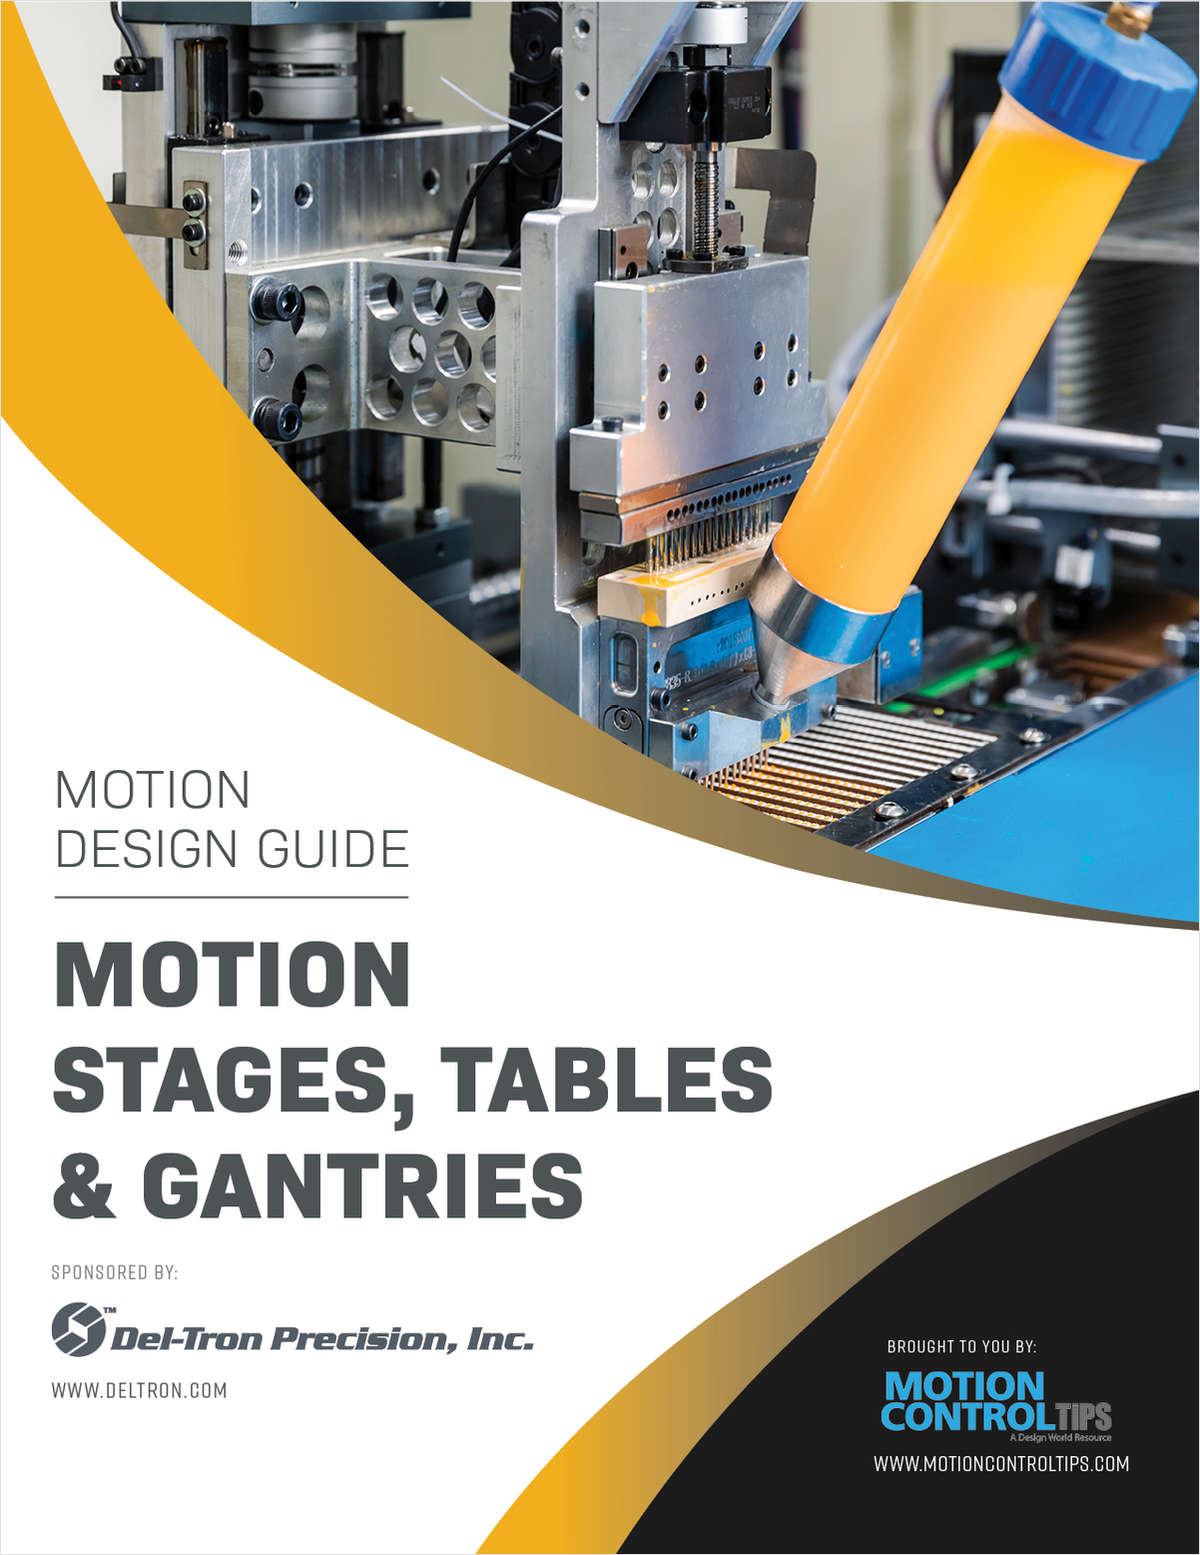 Motion Stages, Tables & Gantries Design Guide